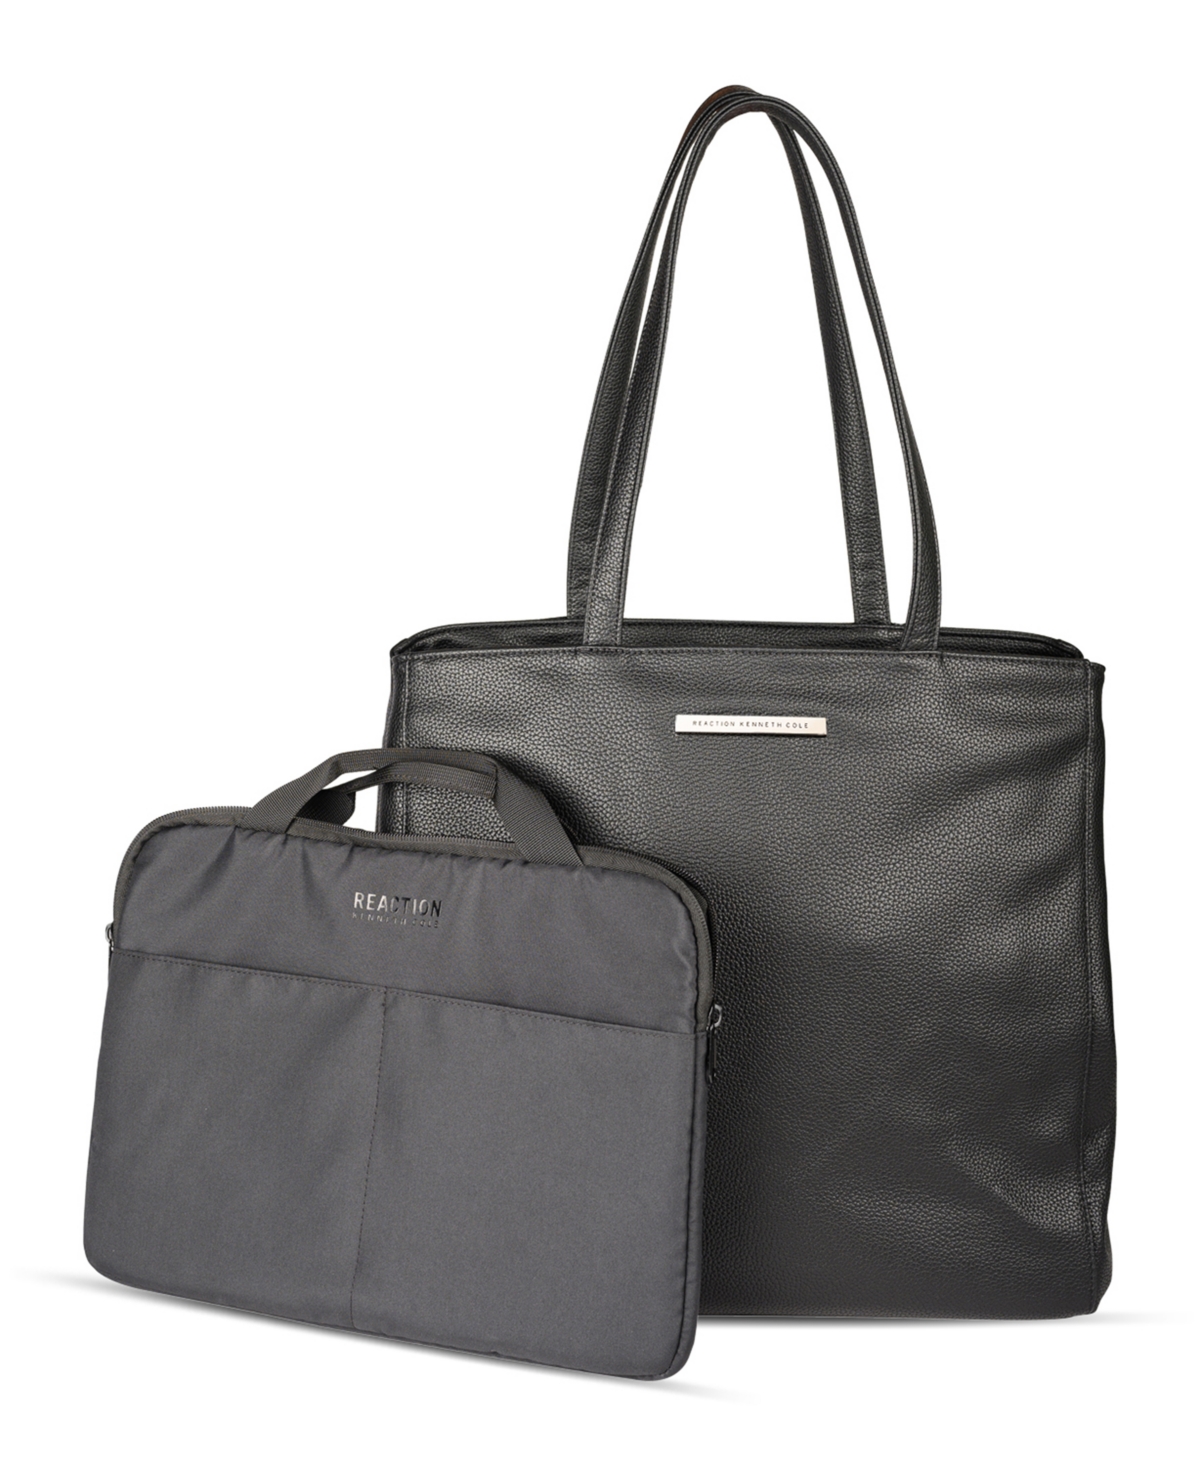 Faux Leather Marley 16" Laptop Tote with Removable Laptop Sleeve - Black